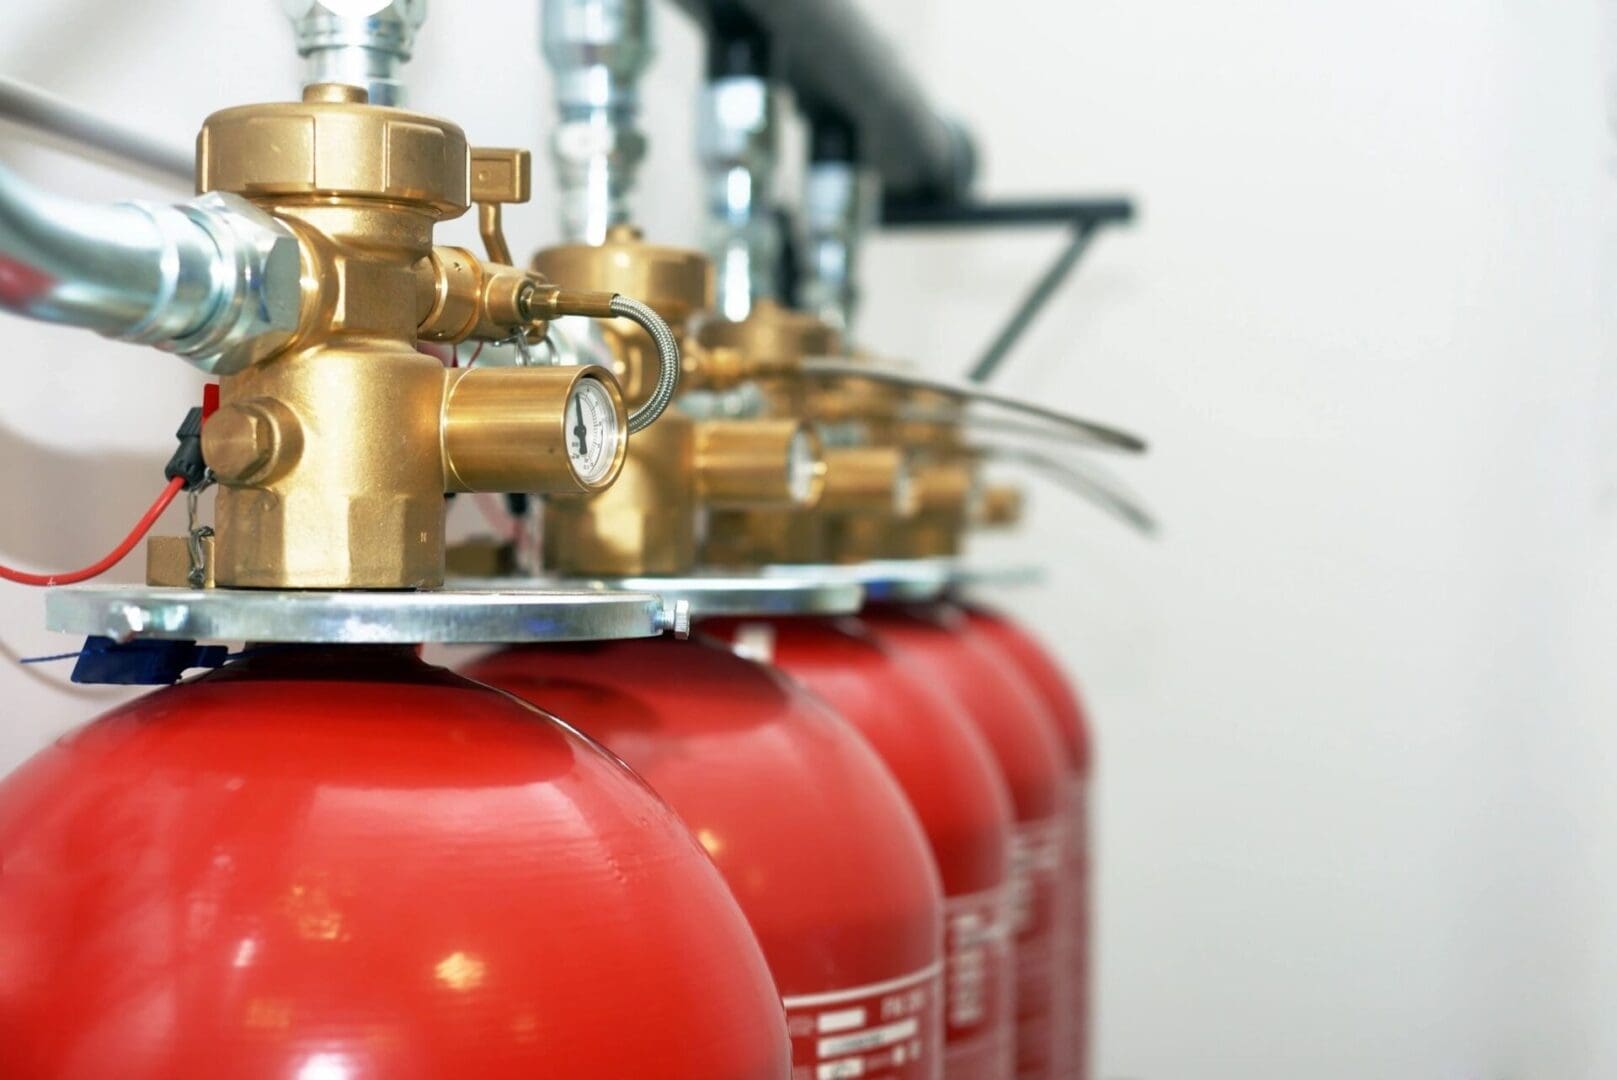 A group of red cylinders with valves on them.